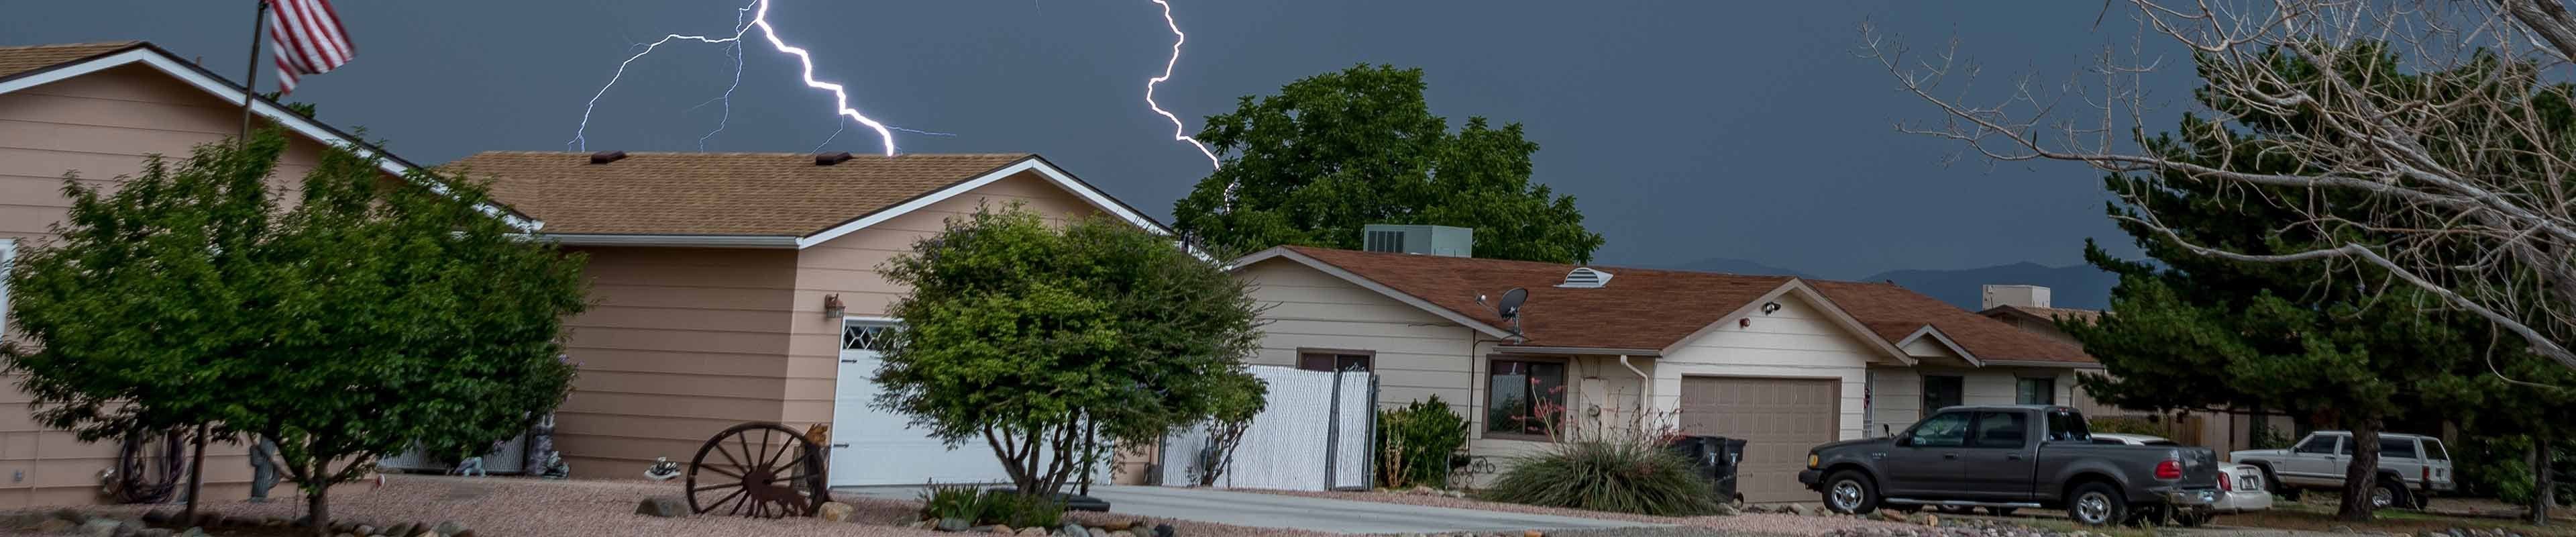 Image of homes in a neighborhood with lightning striking from above.